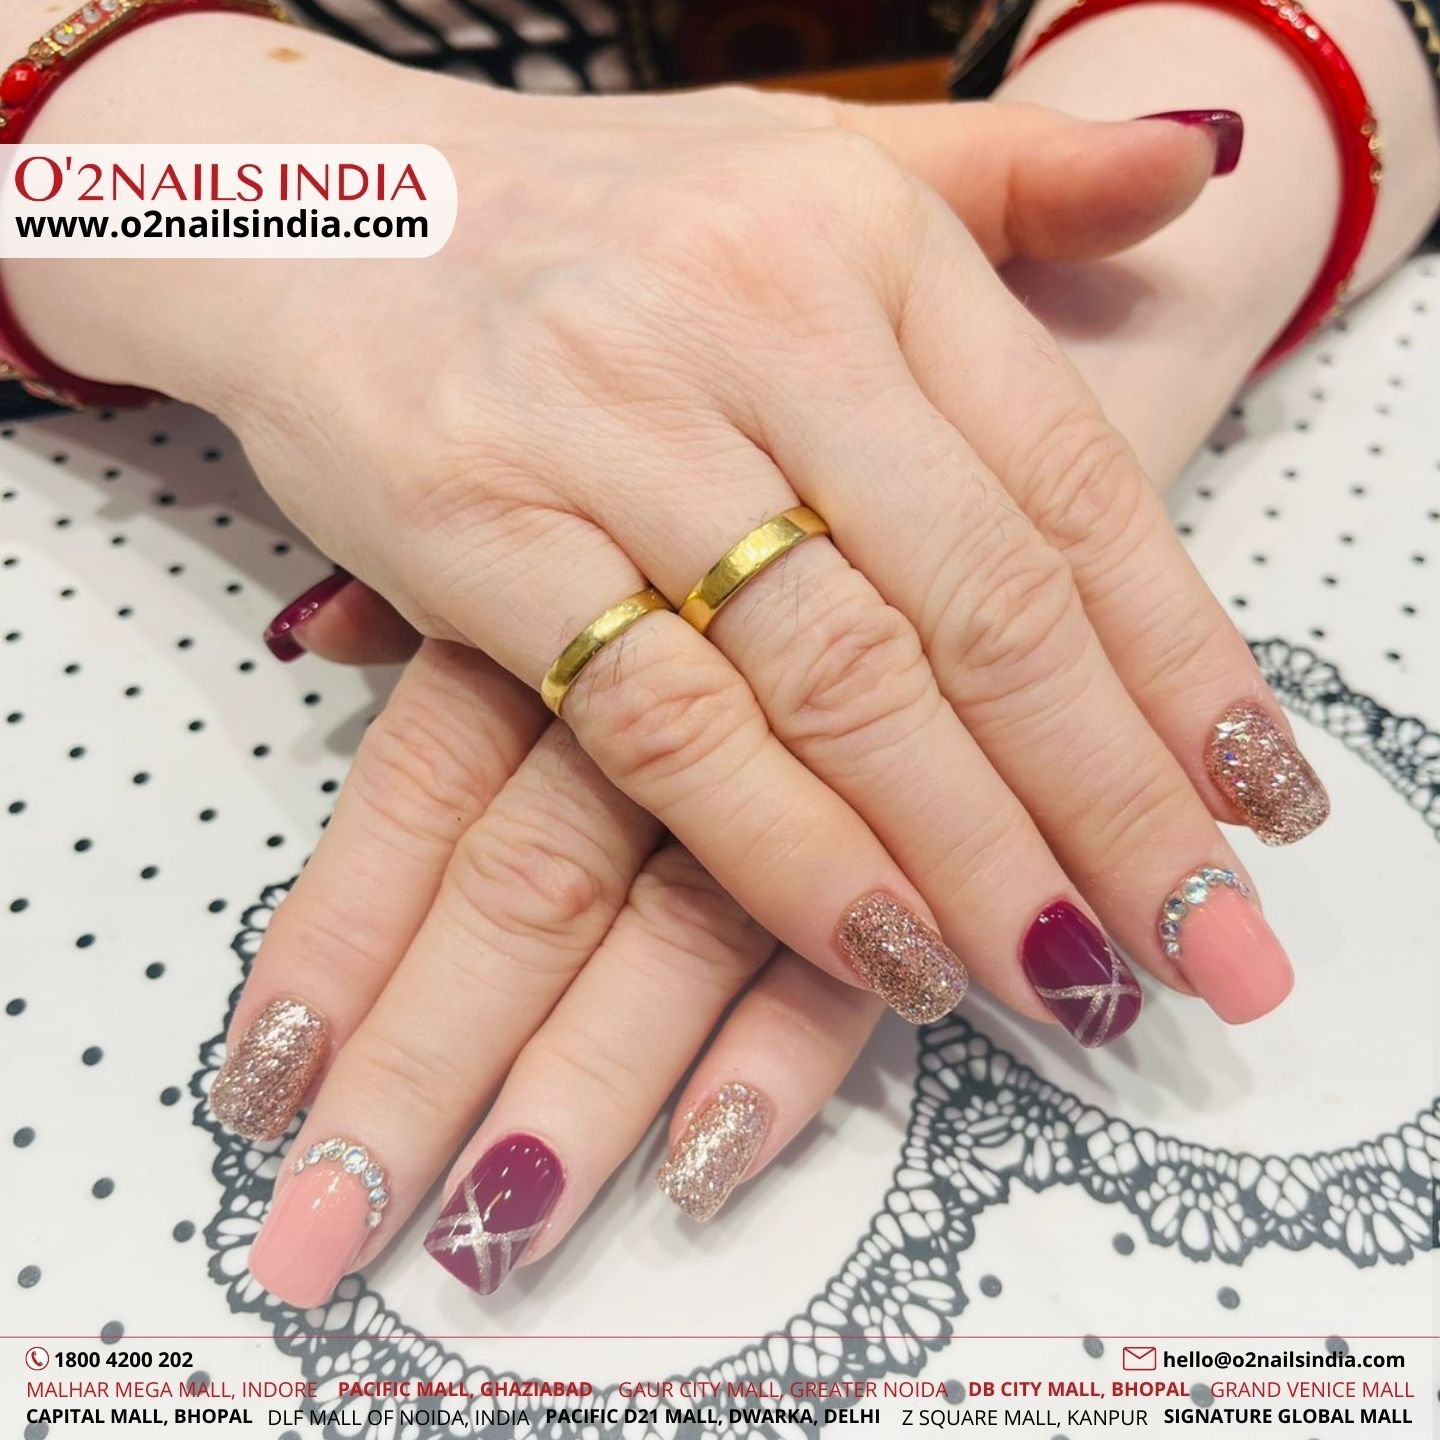 20 Best Bridal Nail Art Designs for Brides-to-be